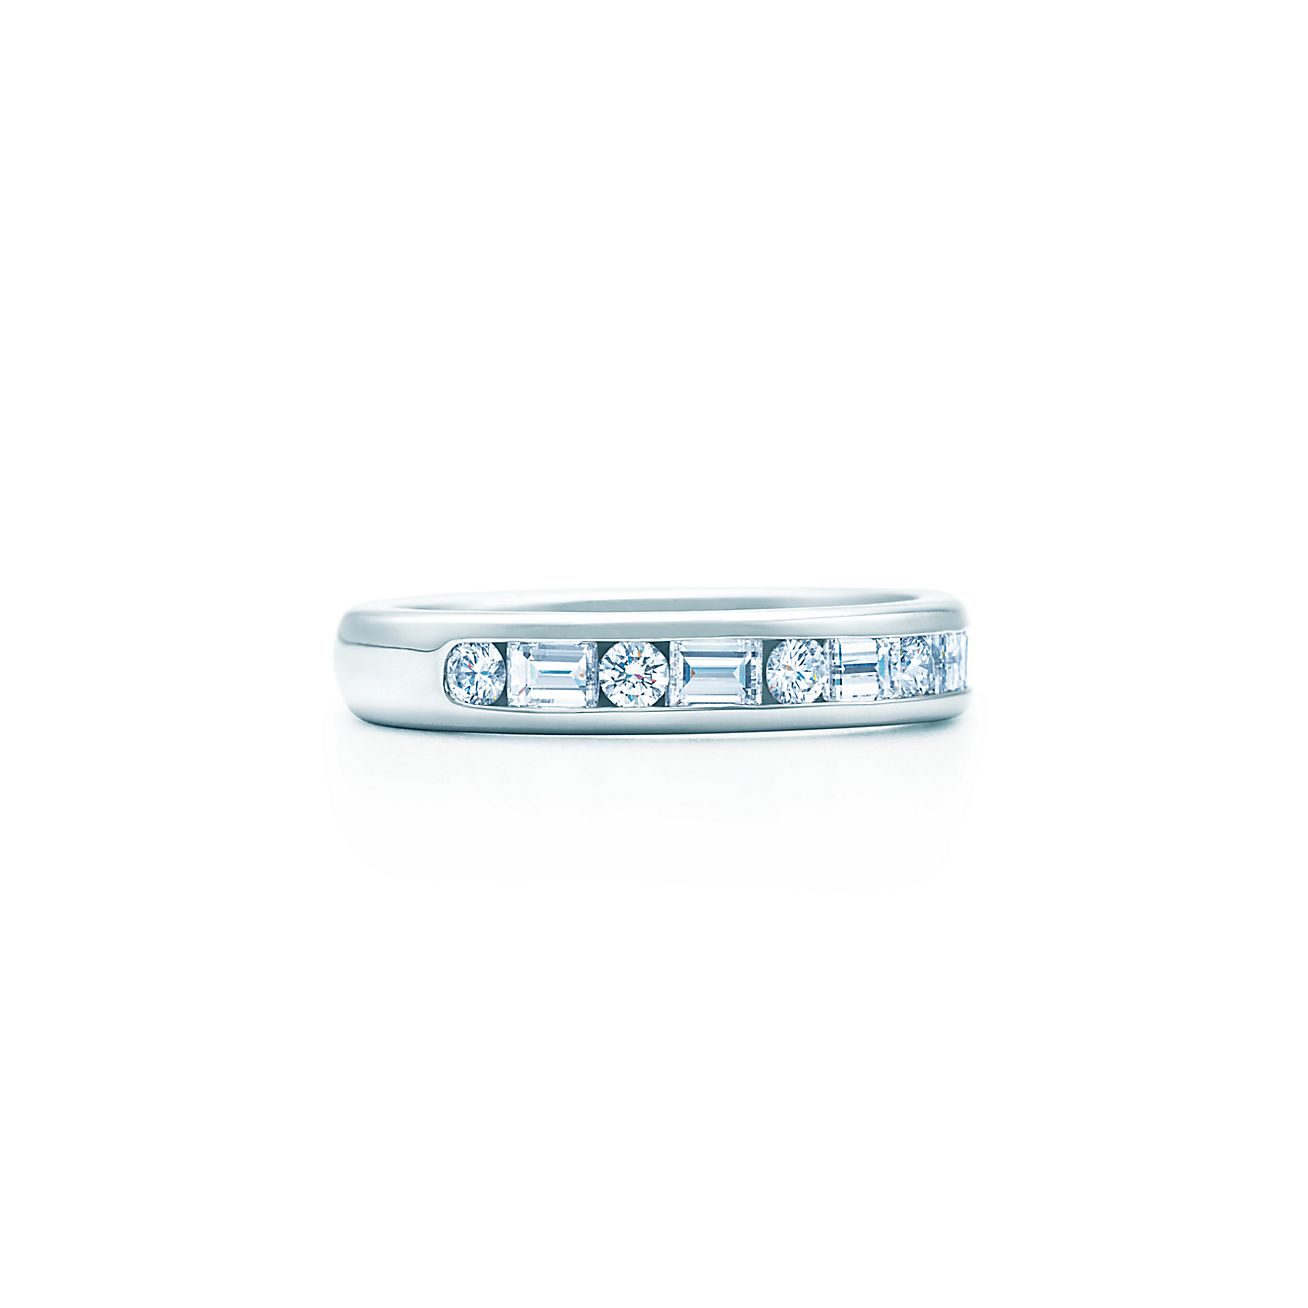 Channel-set band ring with diamonds in platinum, 3mm wide.